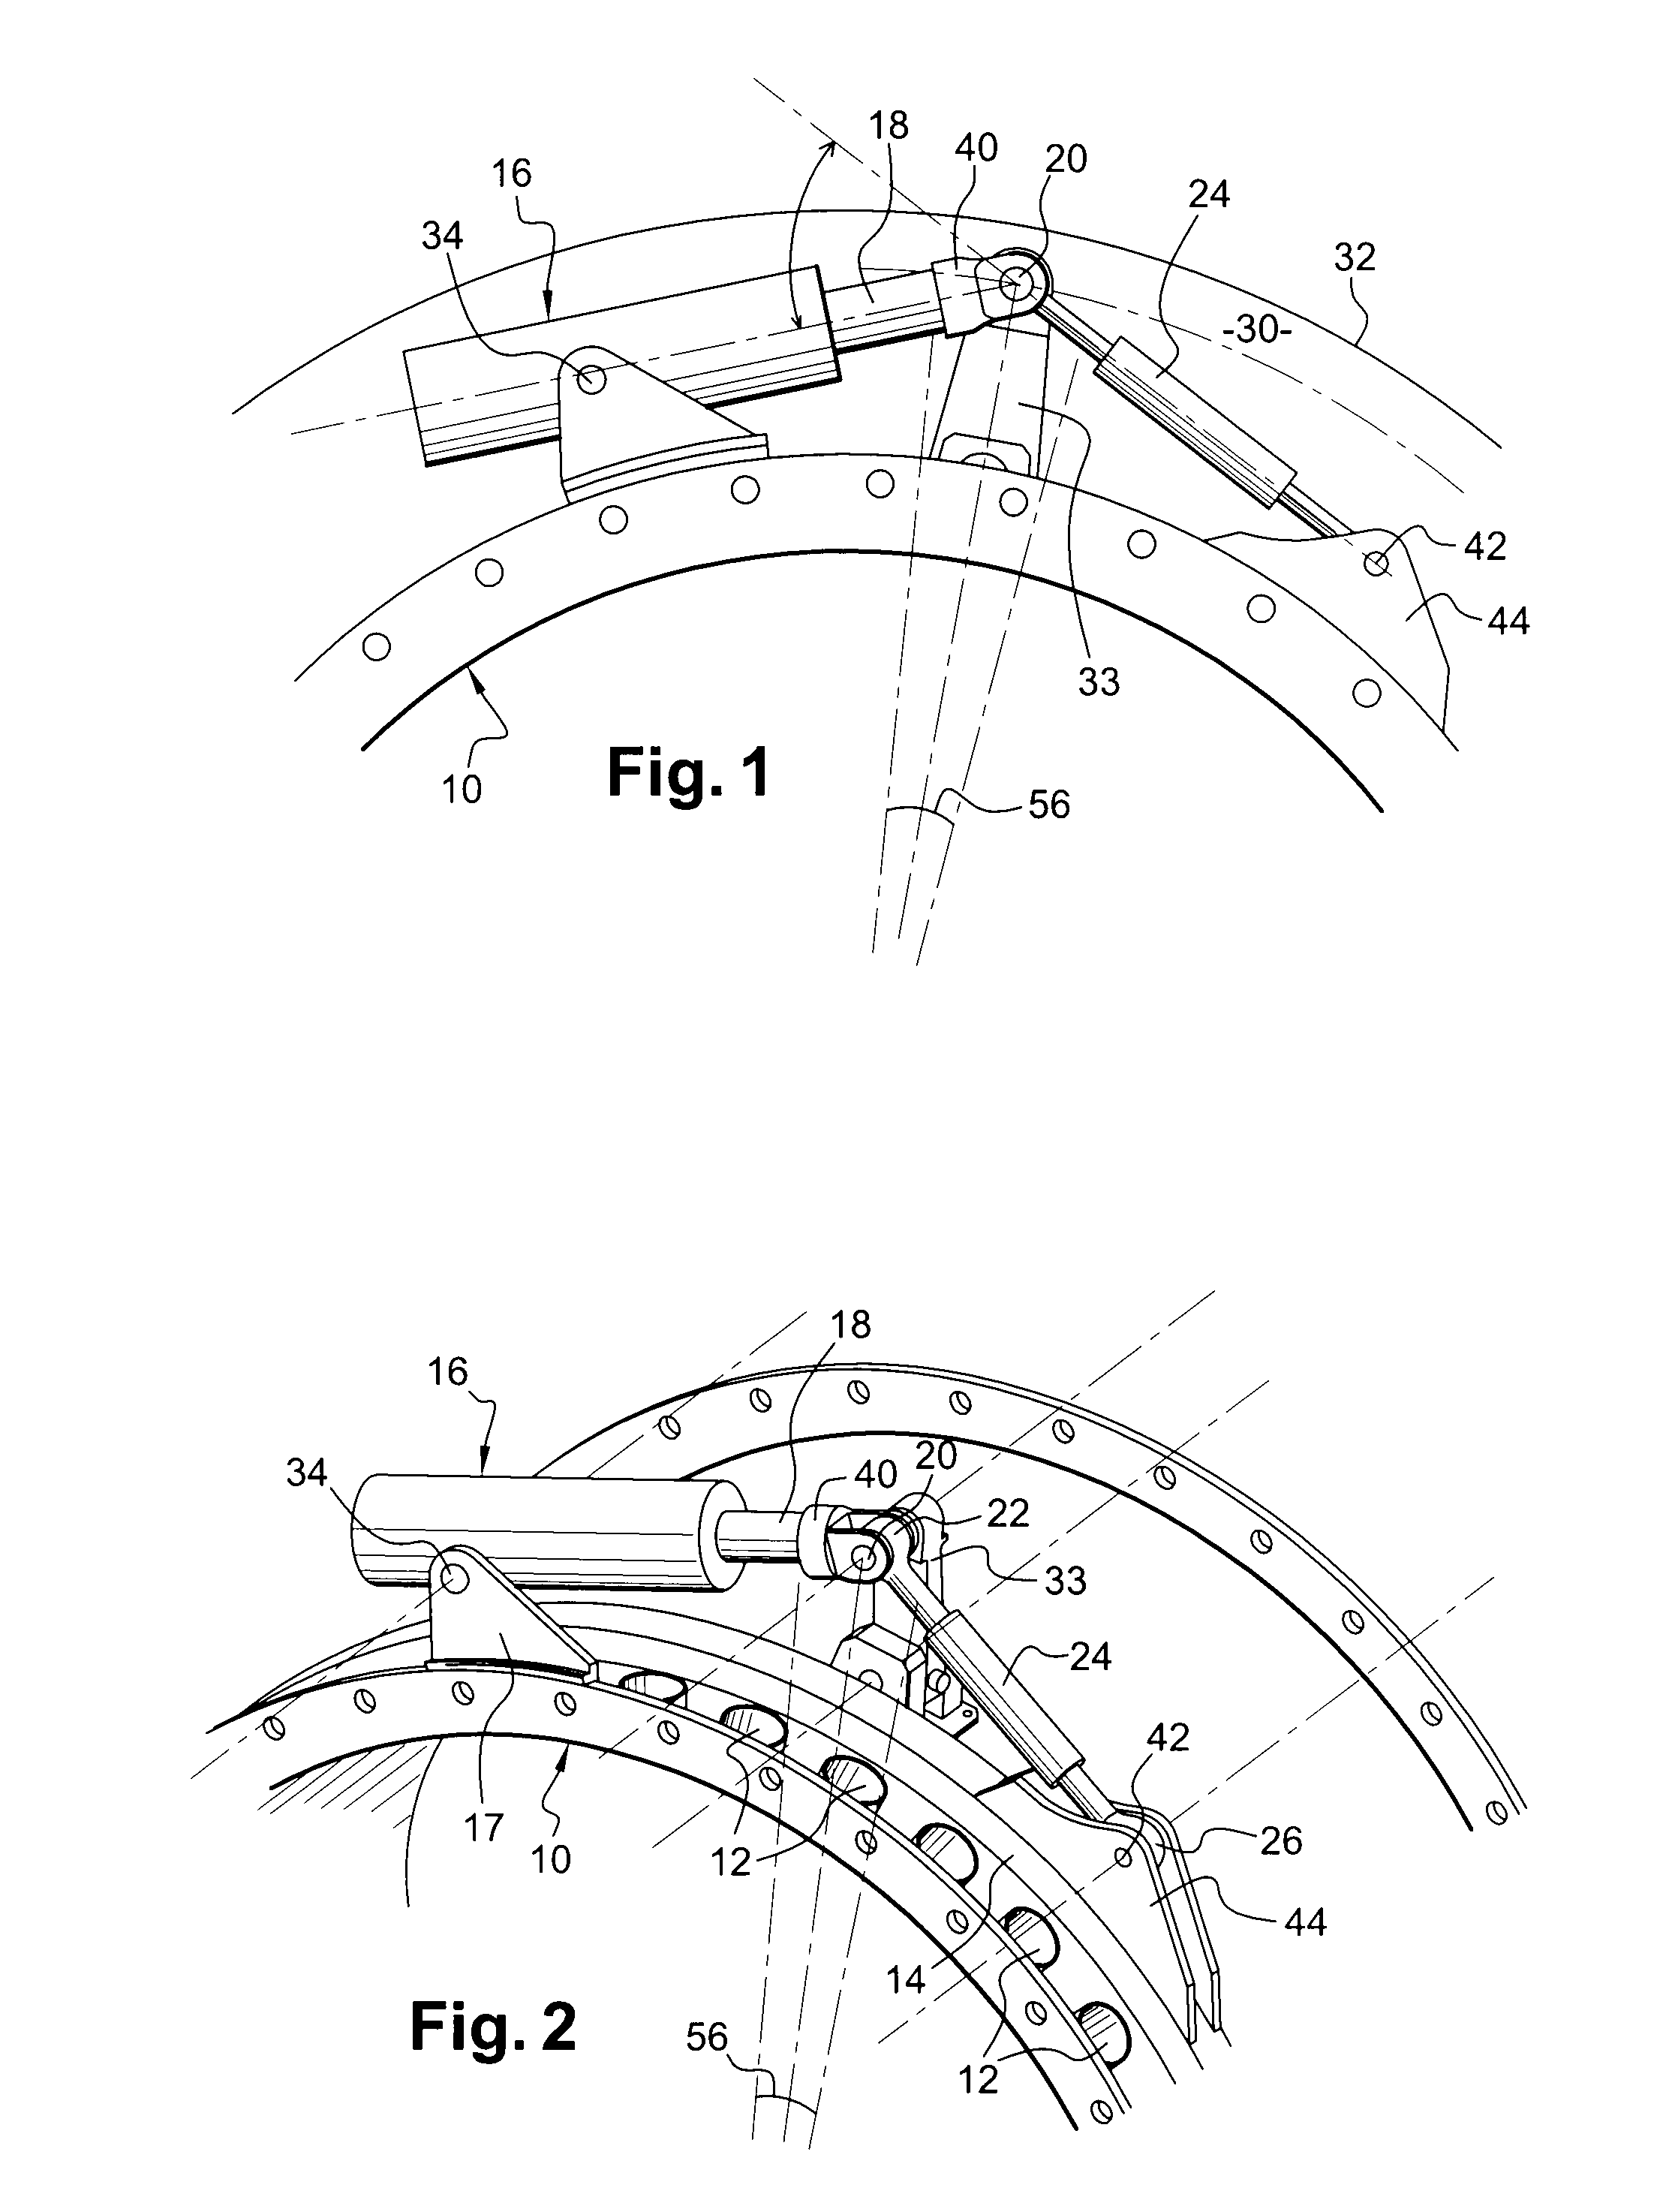 Control device of variable pitch vanes in a turbomachine